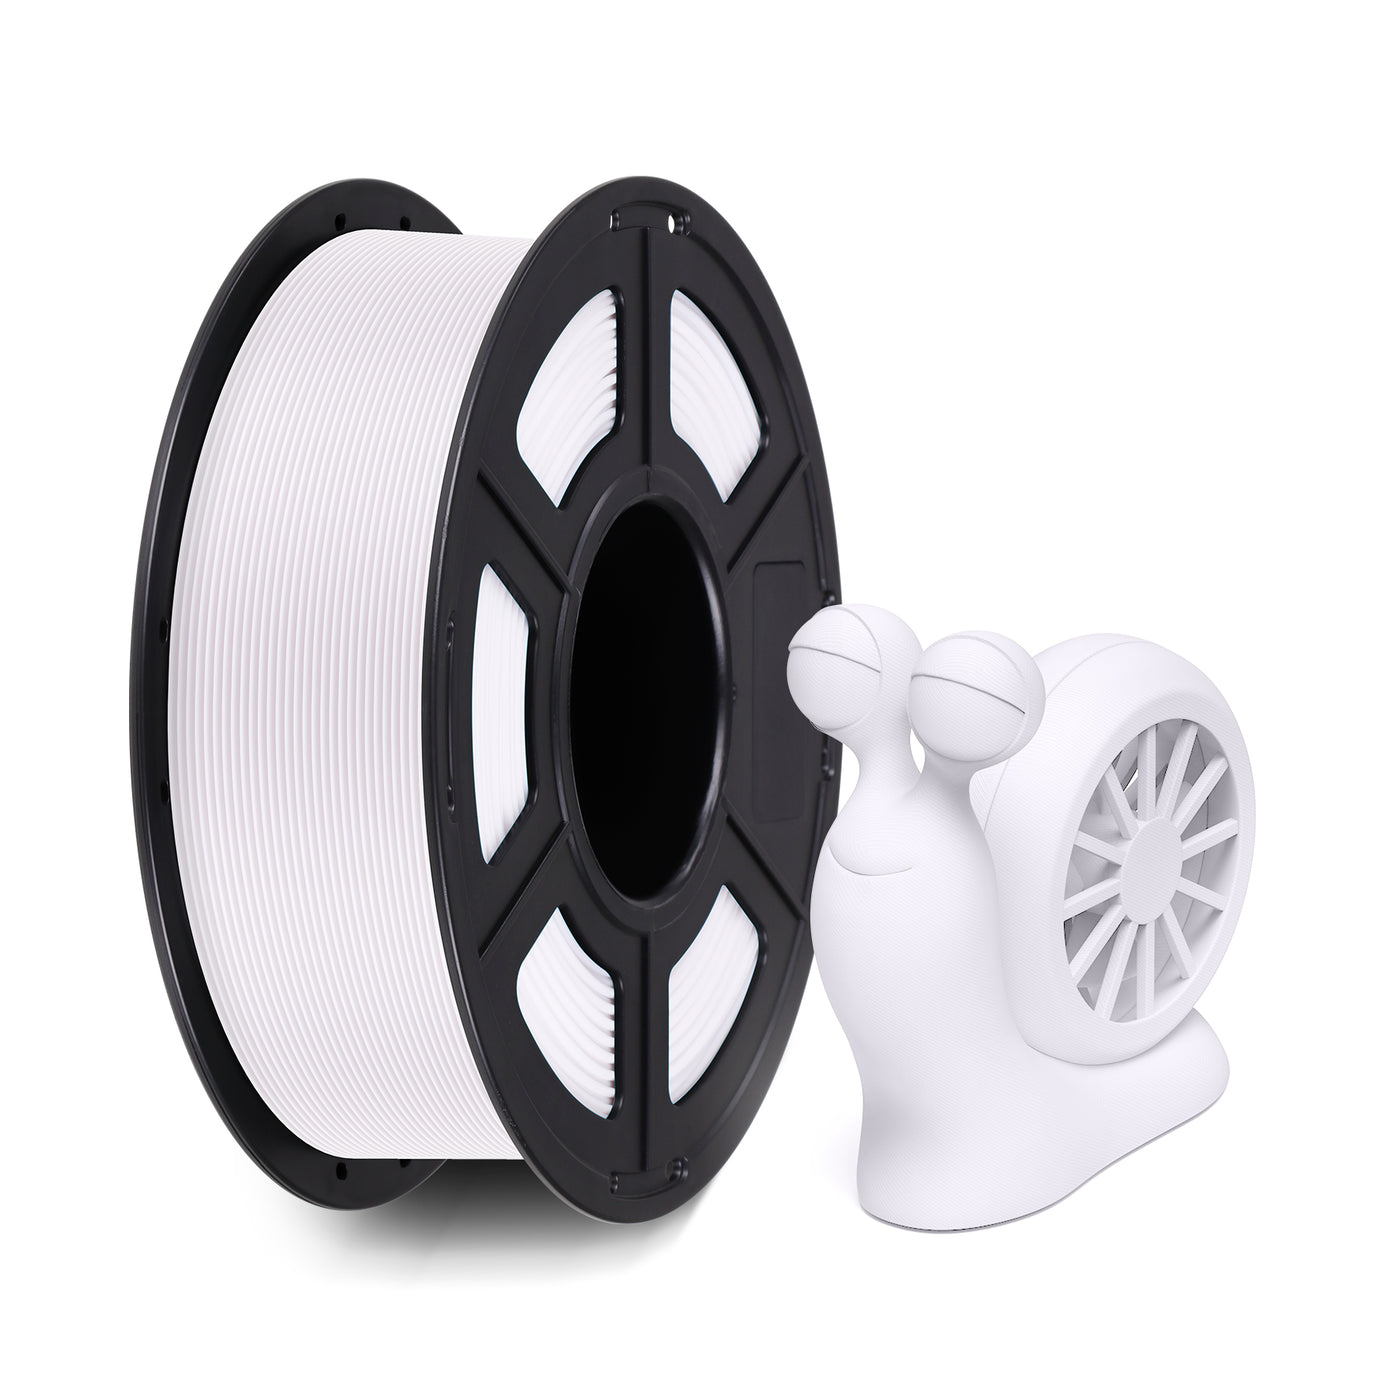 PLA+ Filament - Get 3 for the price of 2